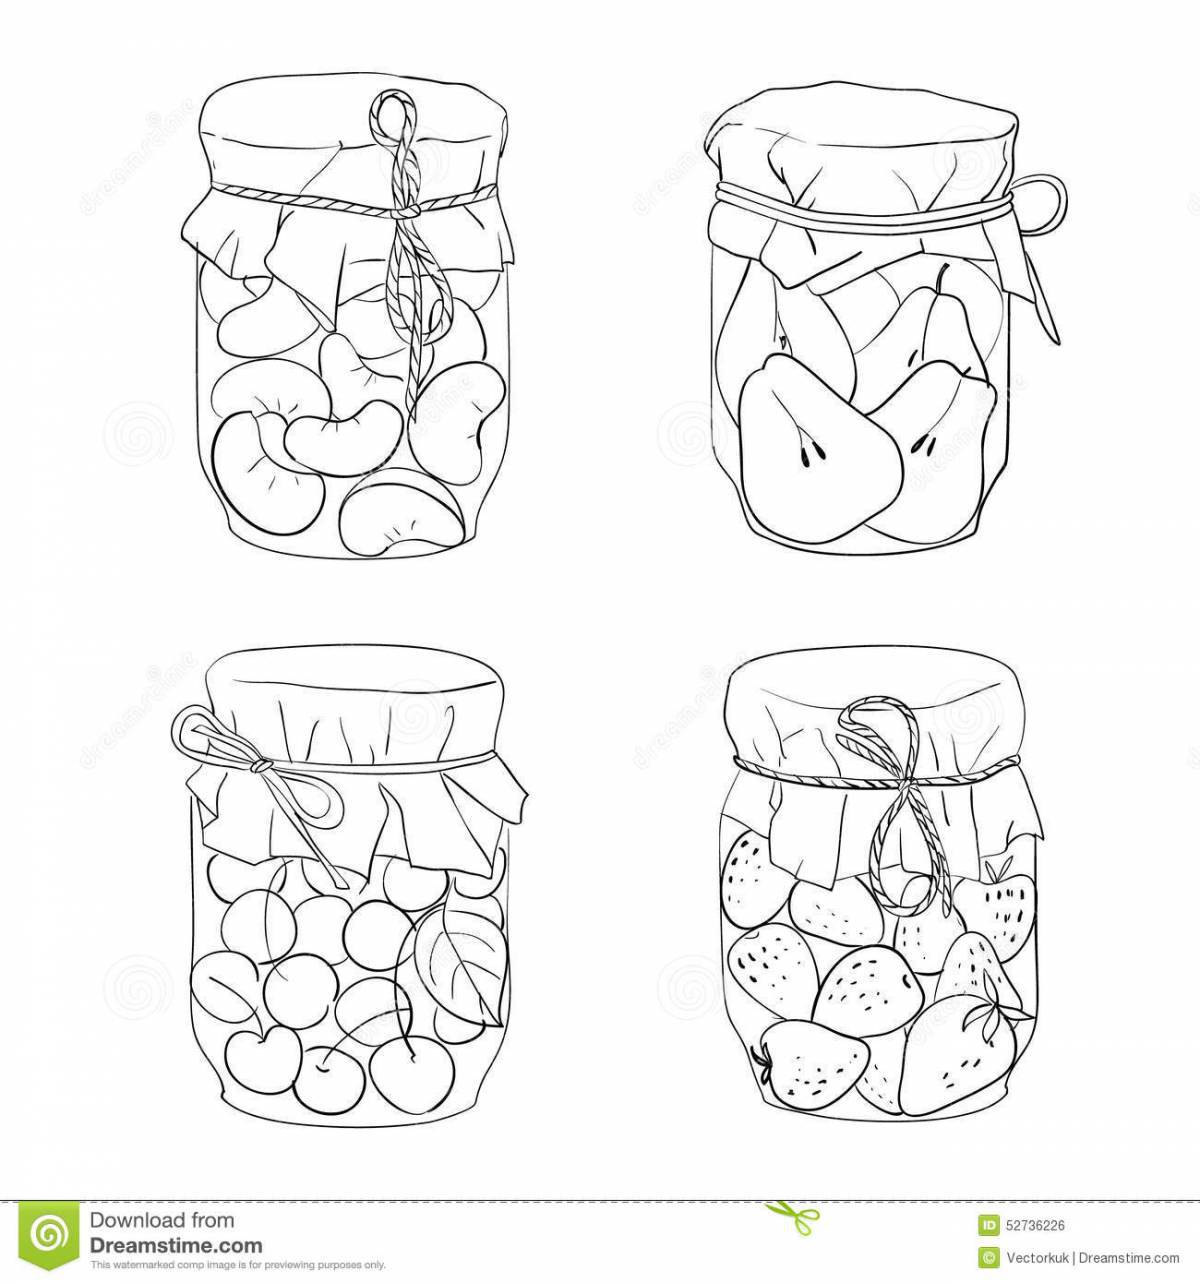 Awesome compote coloring page